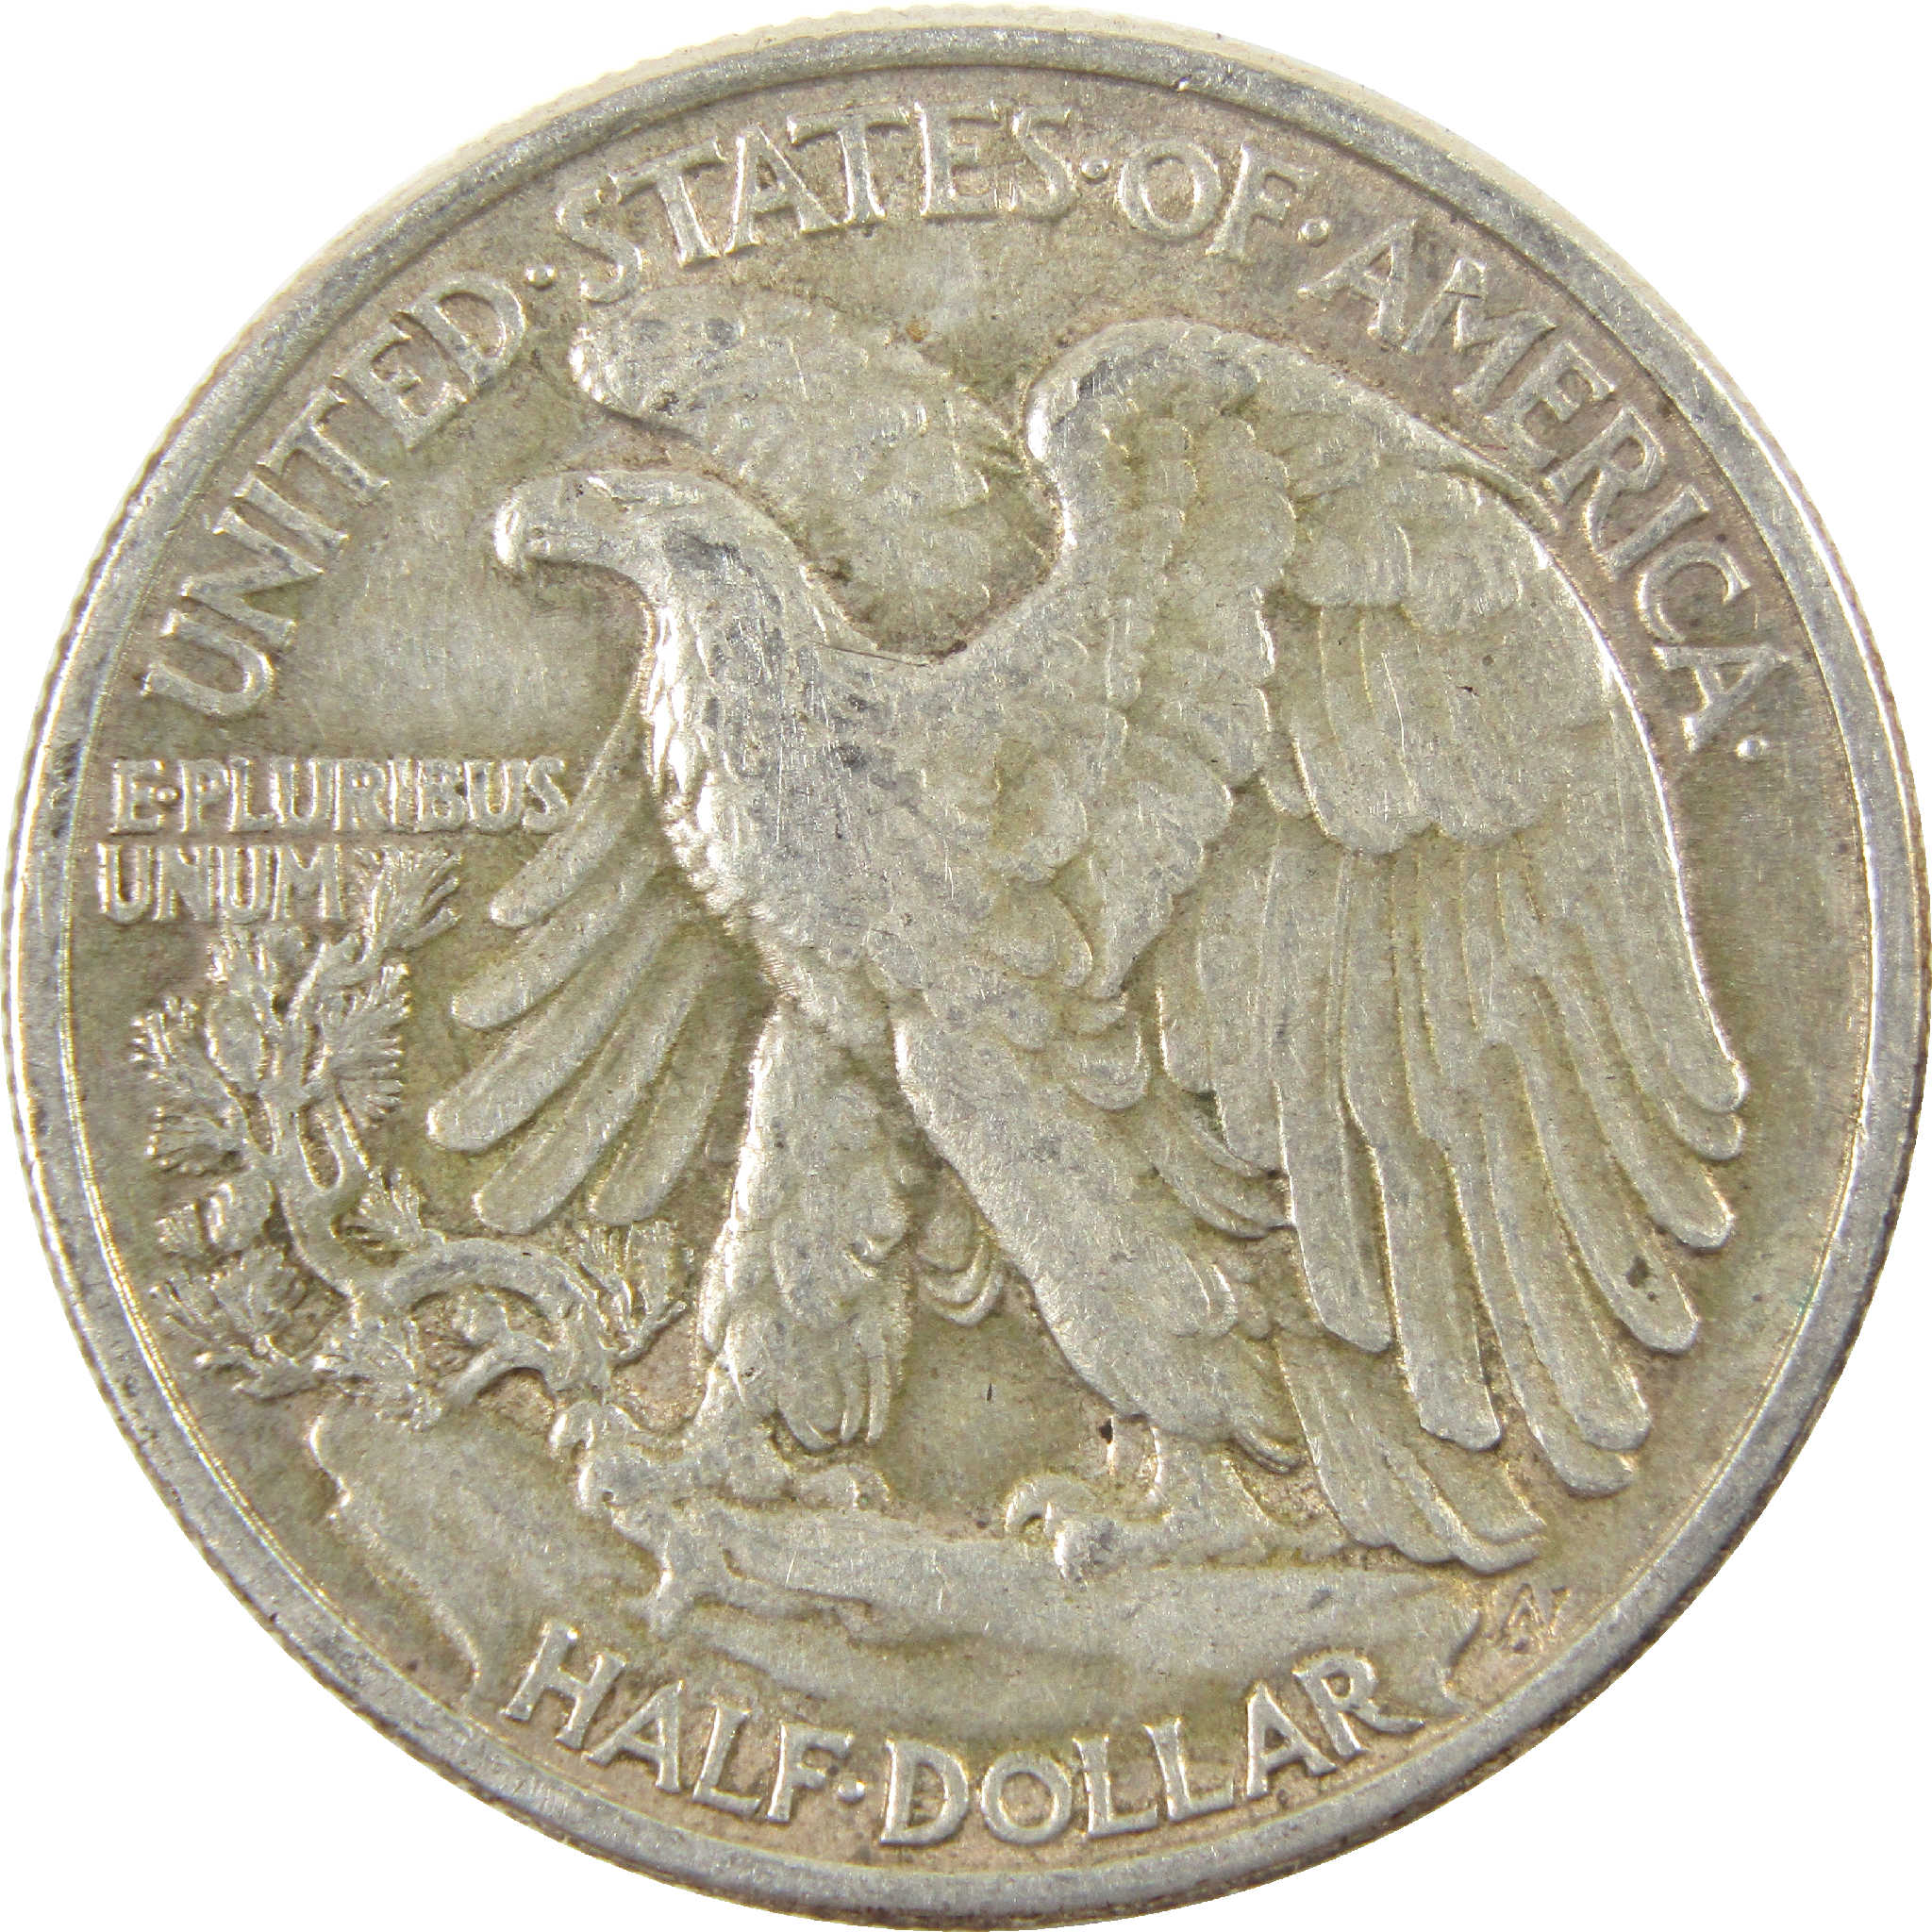 1943 Liberty Walking Half Dollar AU About Uncirculated Silver 50c Coin